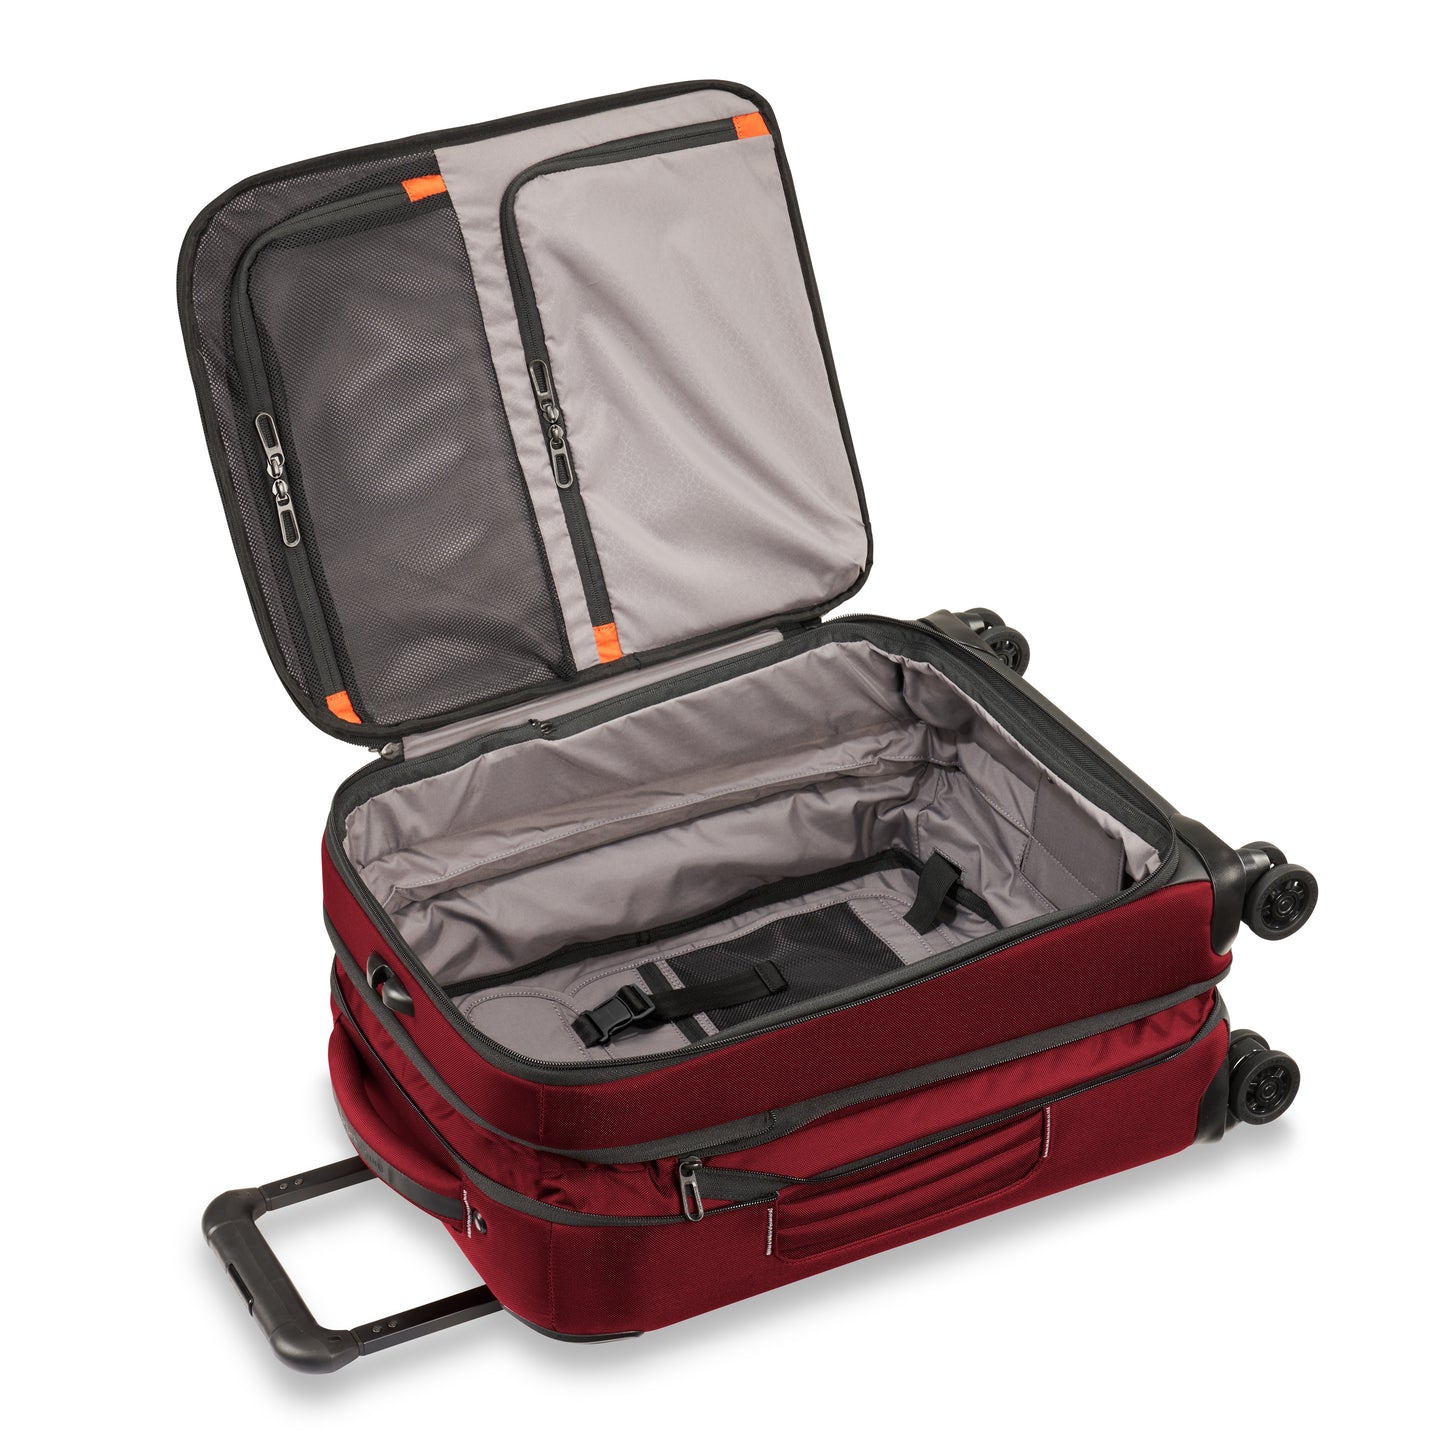 Briggs & Riley ZDX 21" Expandable Carry-On Spinner